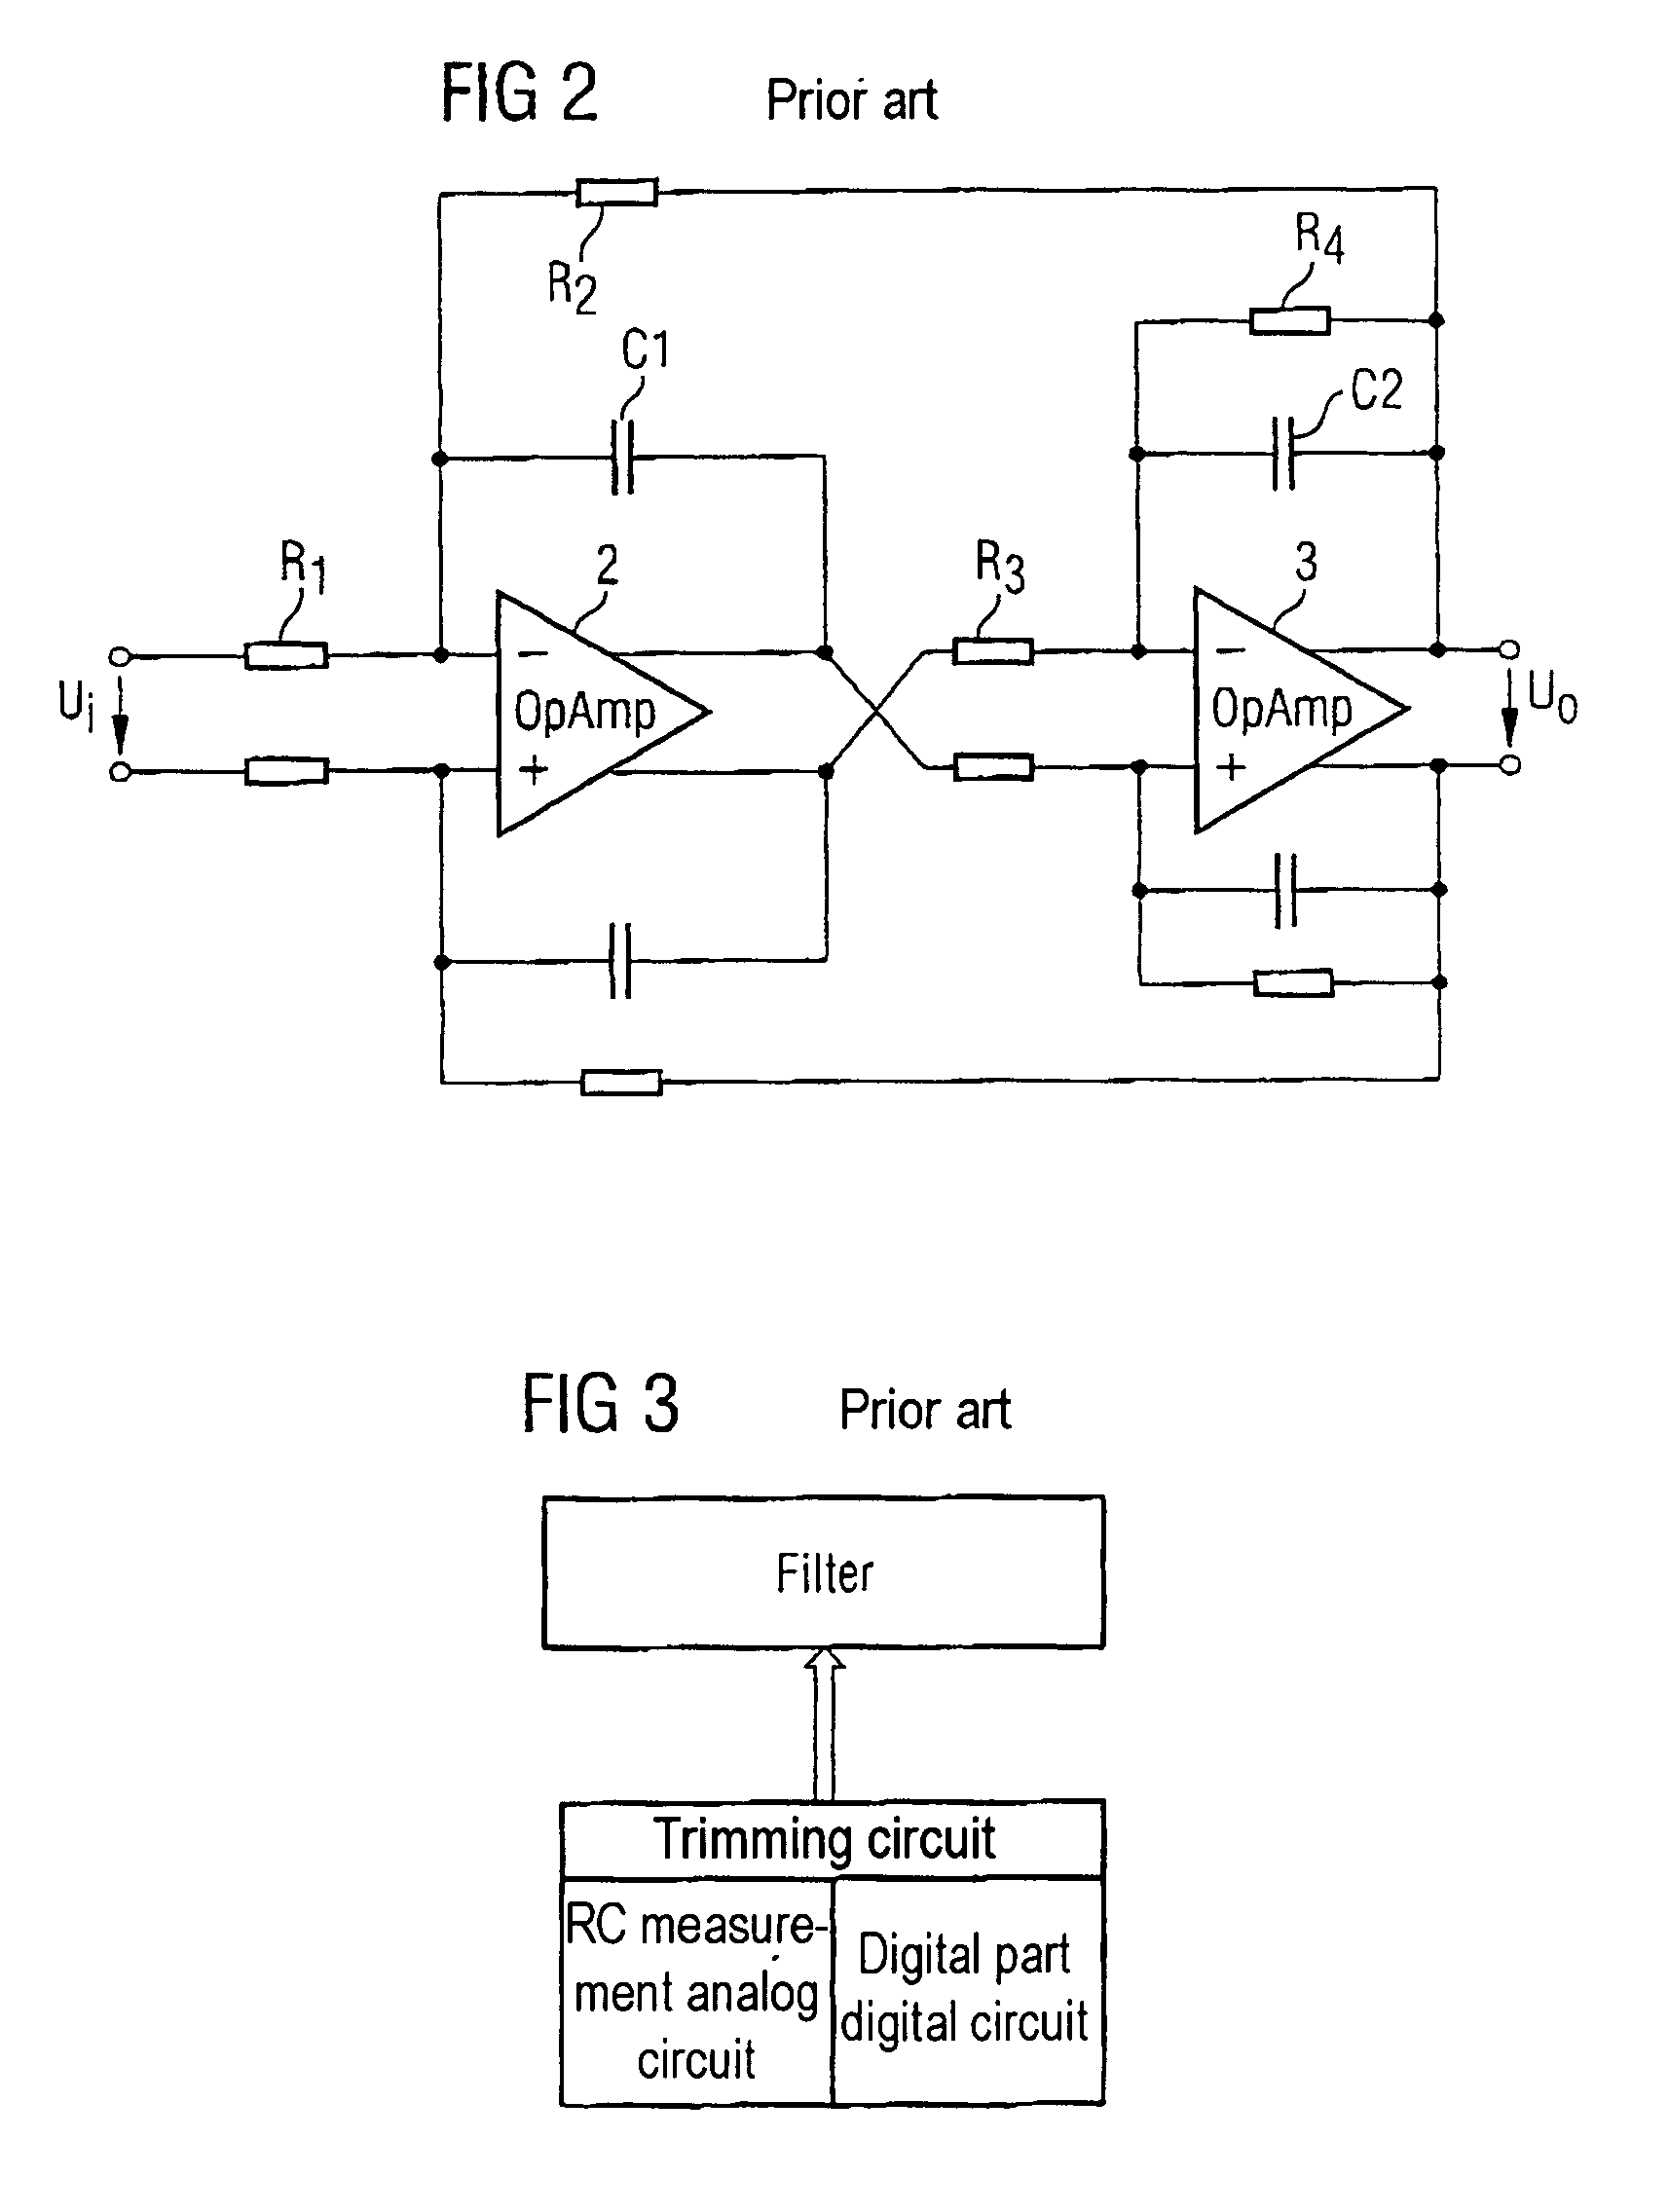 Tuning circuit for a filter